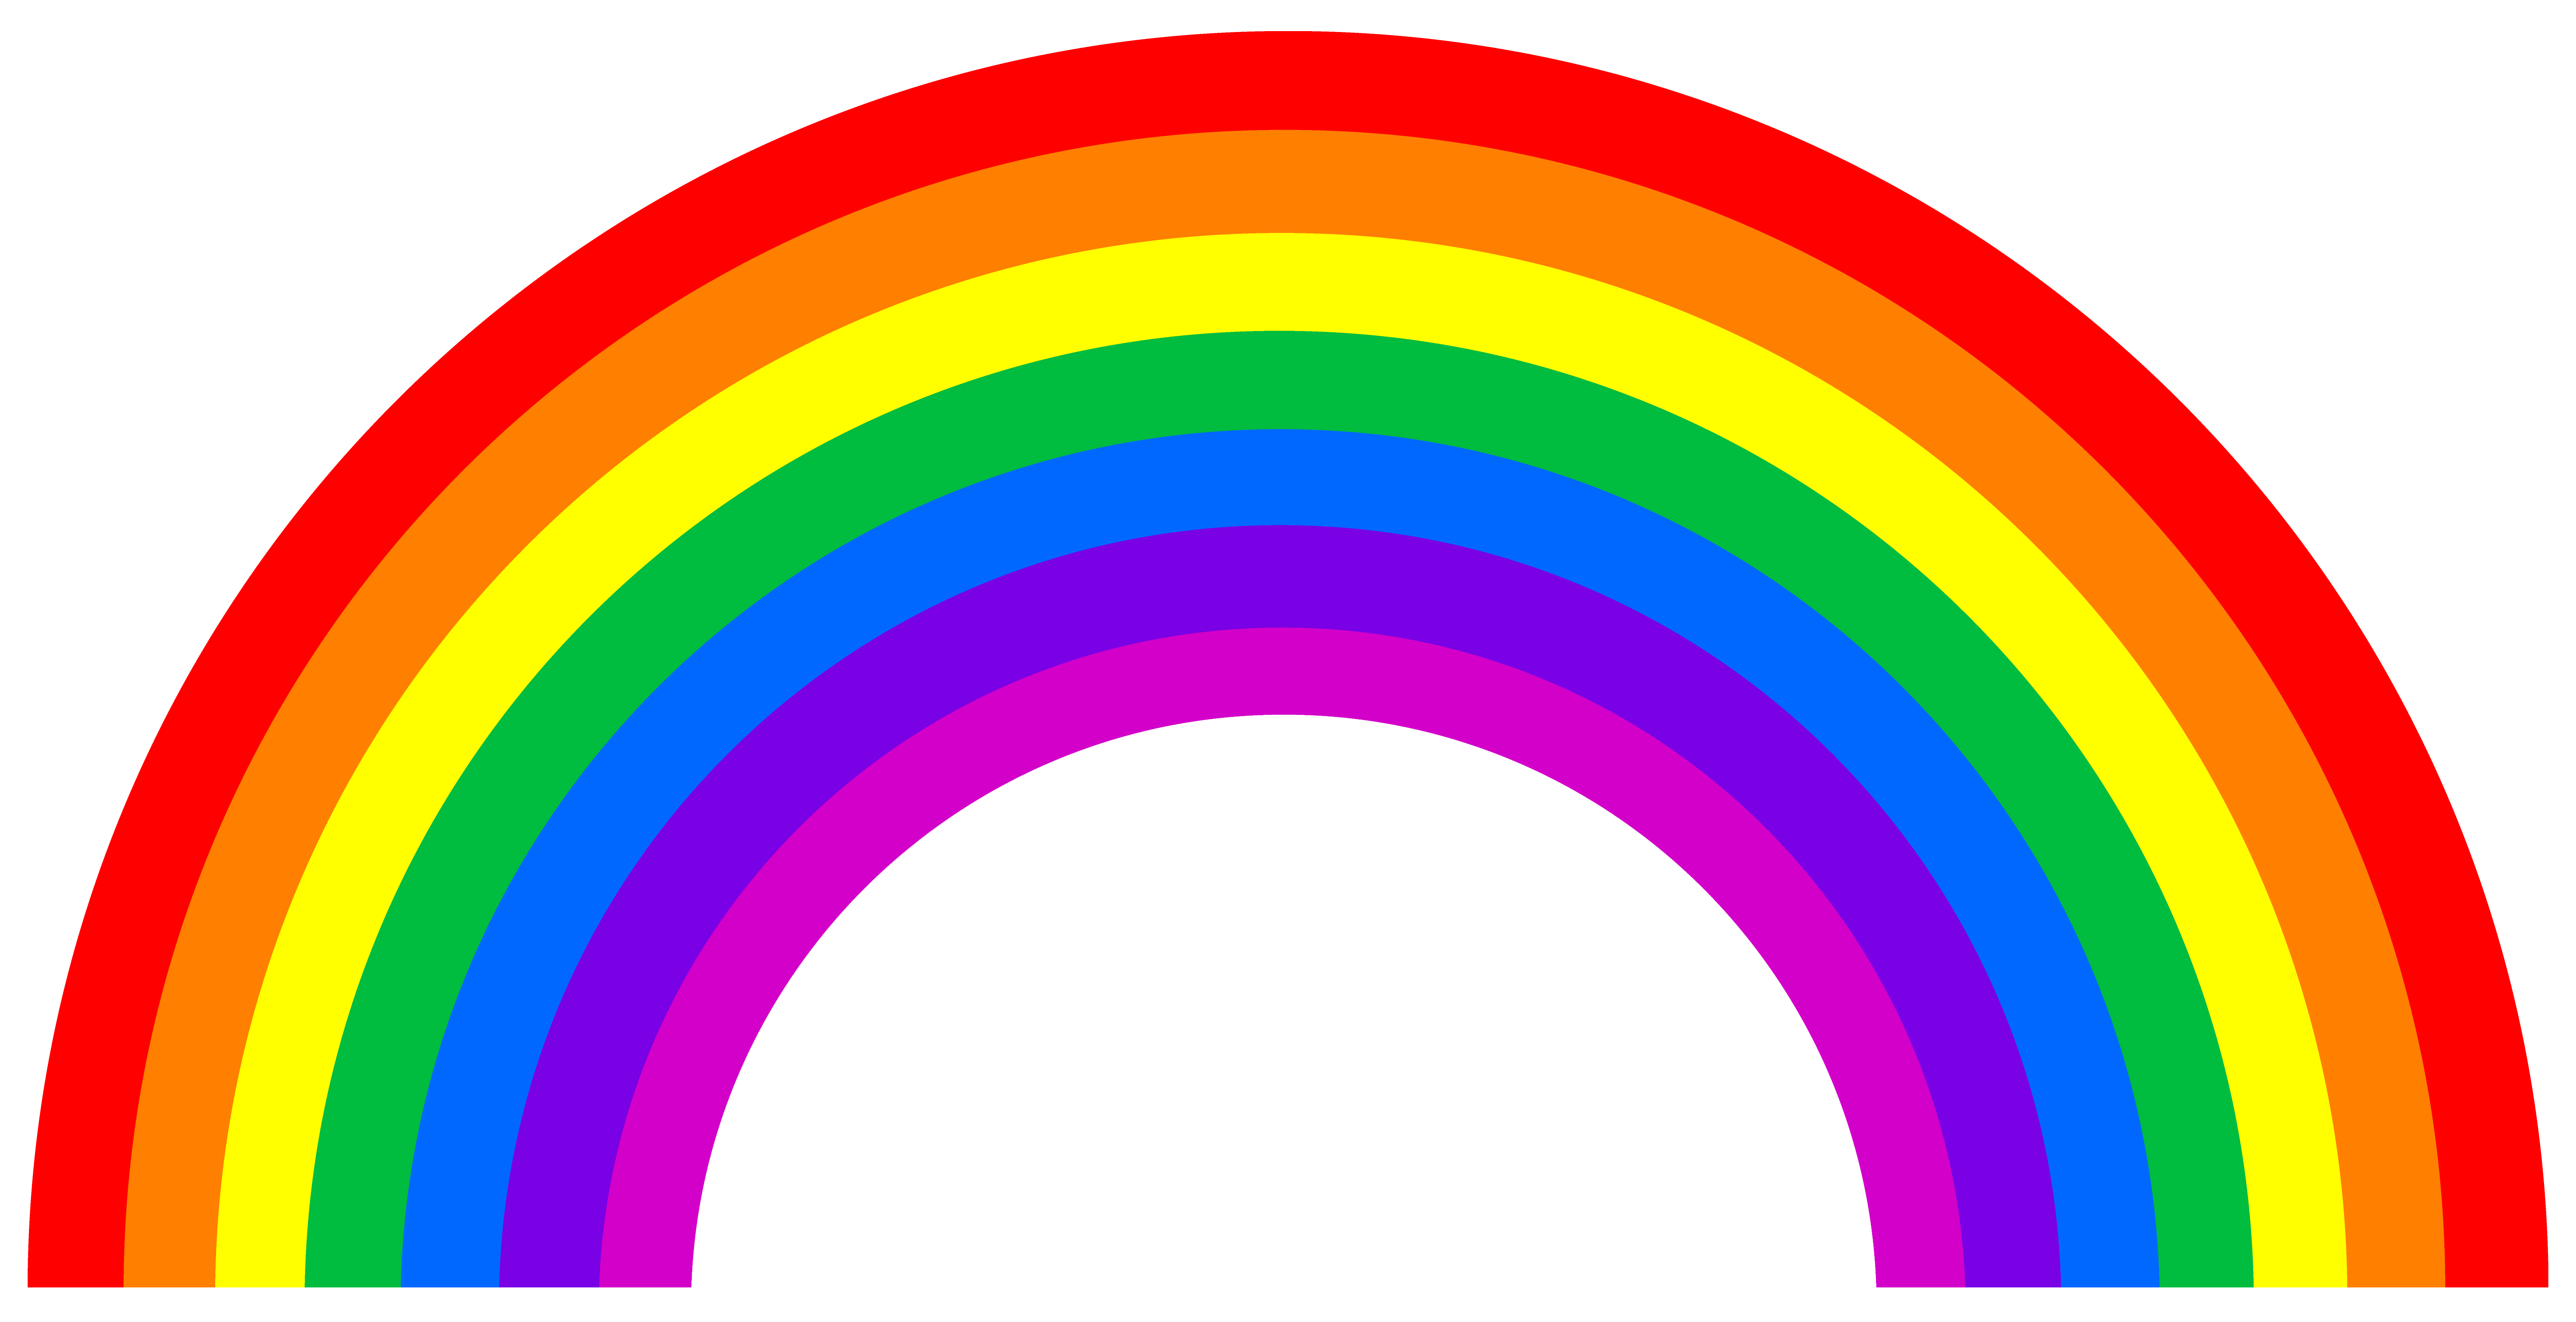 Pictures Of Cartoon Rainbows | Free Download Clip Art | Free Clip ...